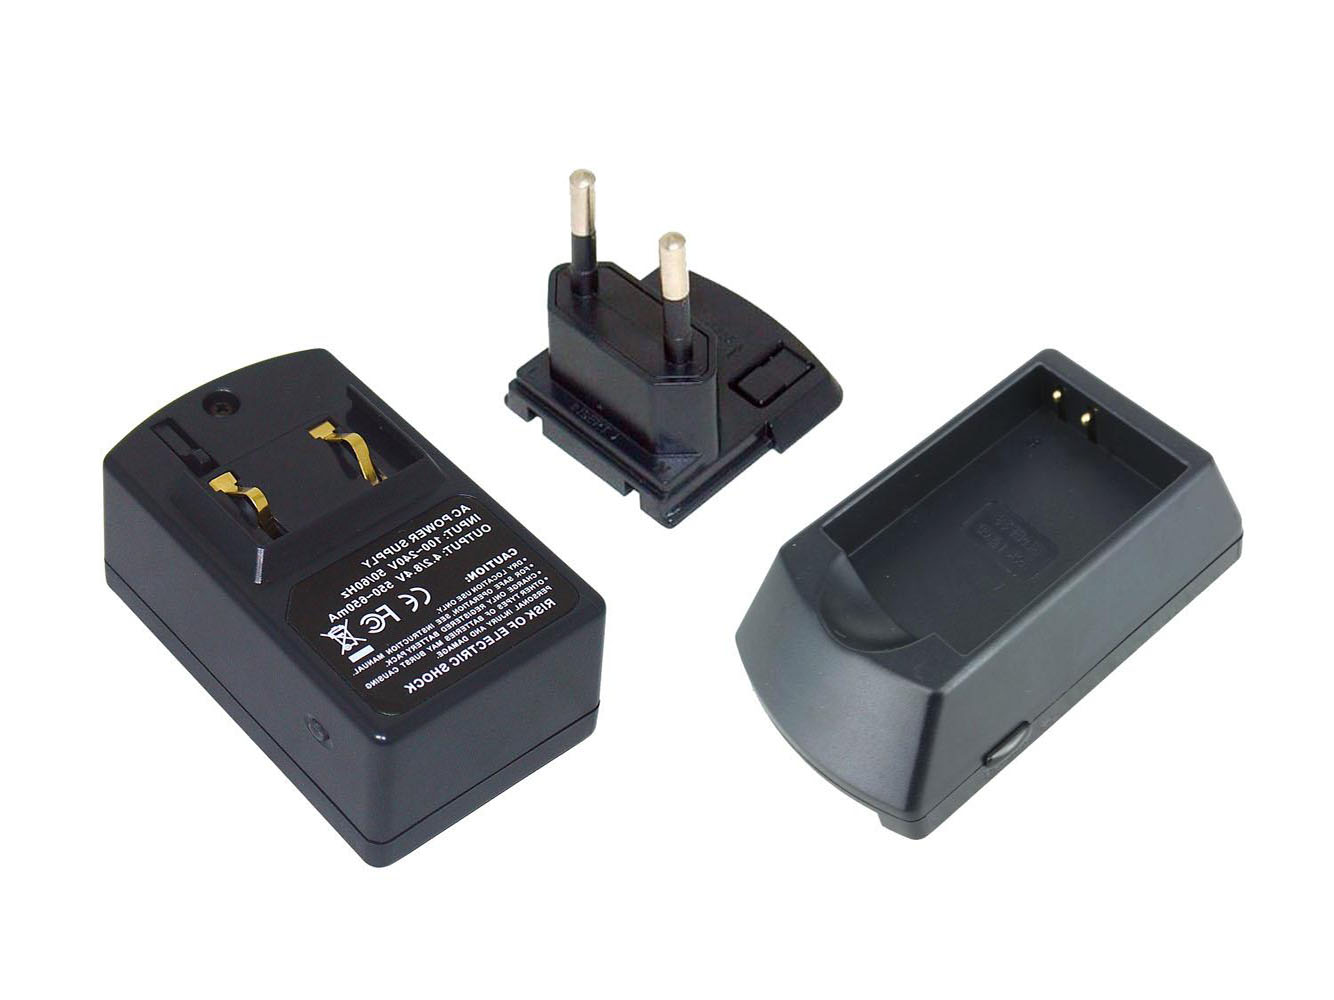 Nikon Mh-67p Battery Chargers For Coolpix P600, Coolpix P610 replacement